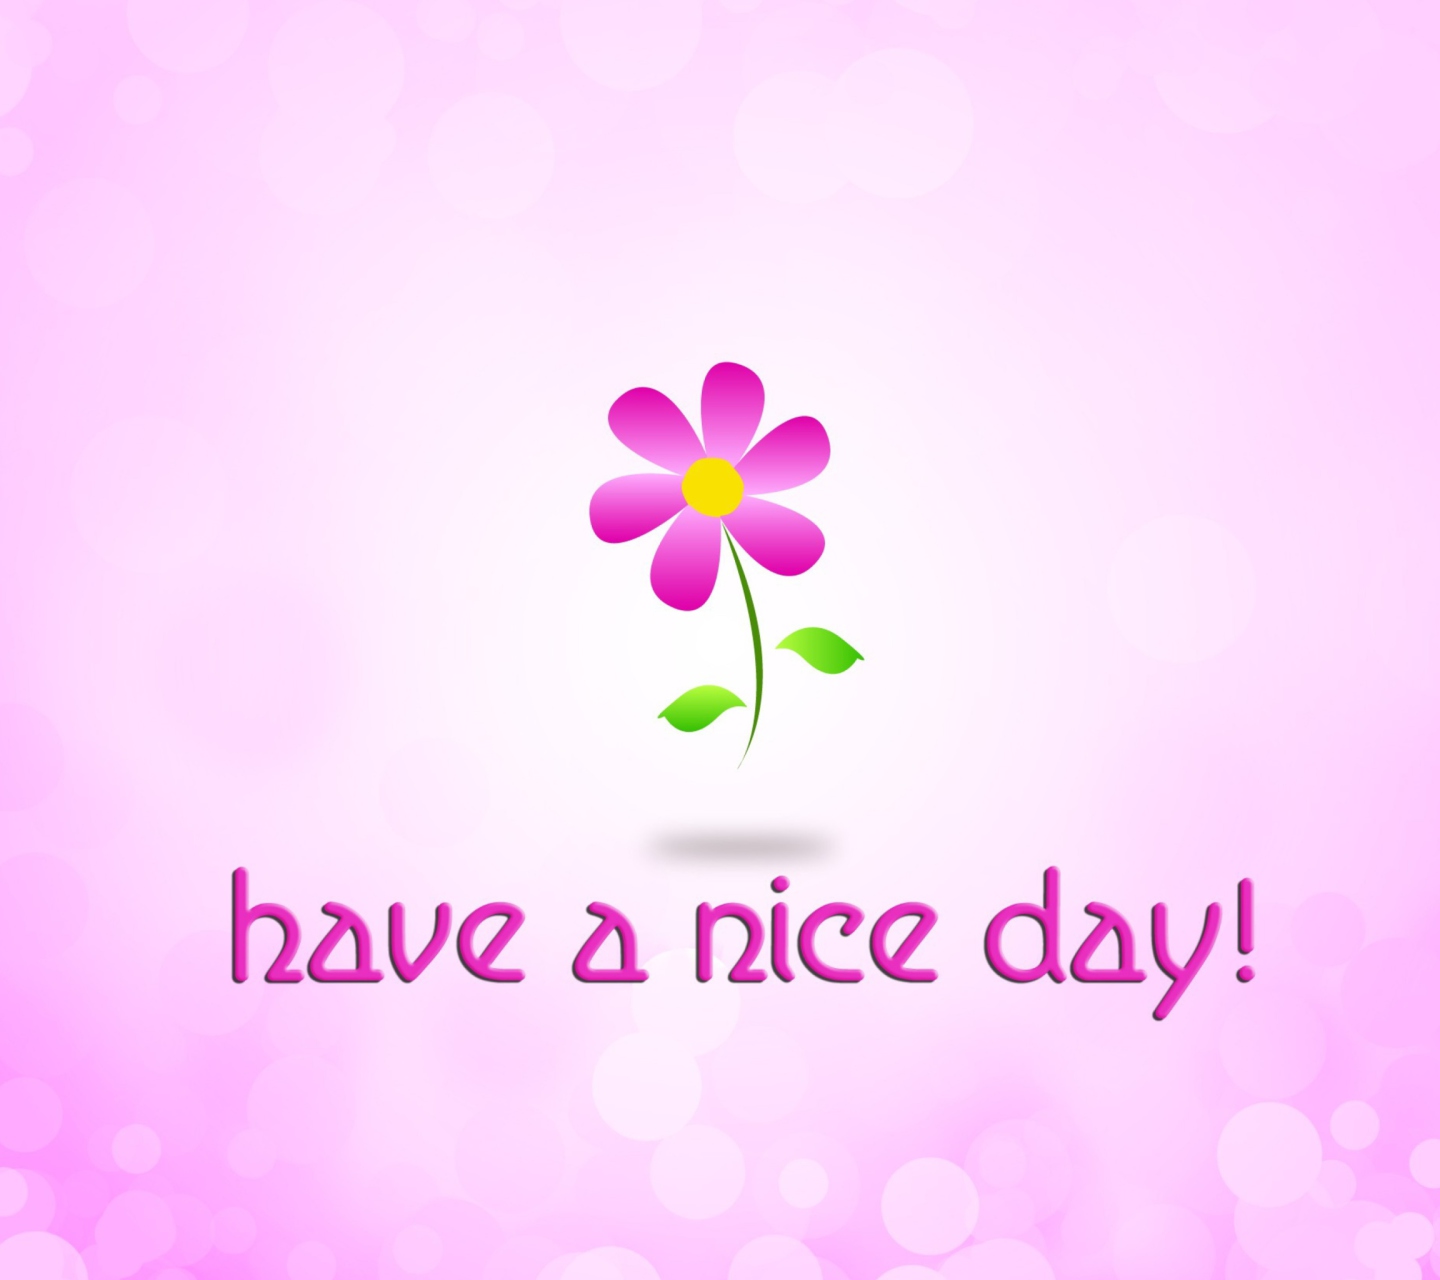 Have a Nice Day wallpaper 1440x1280